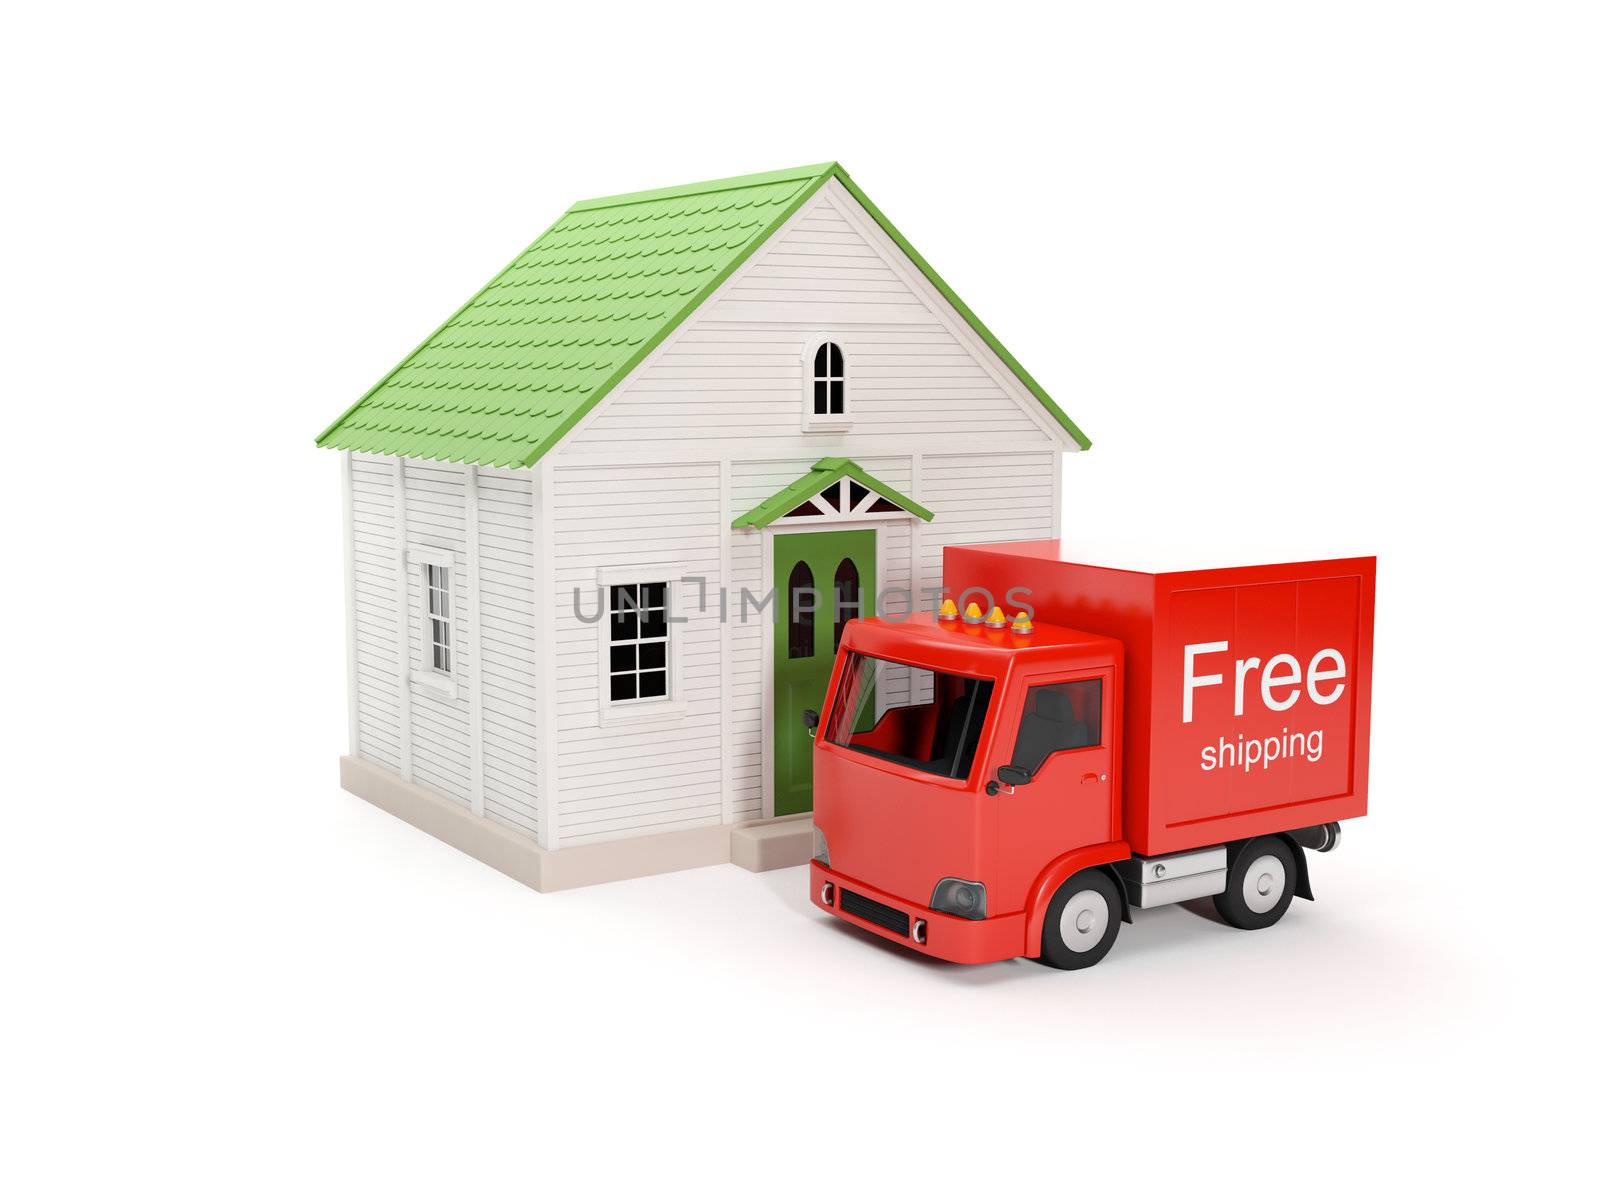 3d illustration: Free delivery to your home by kolobsek